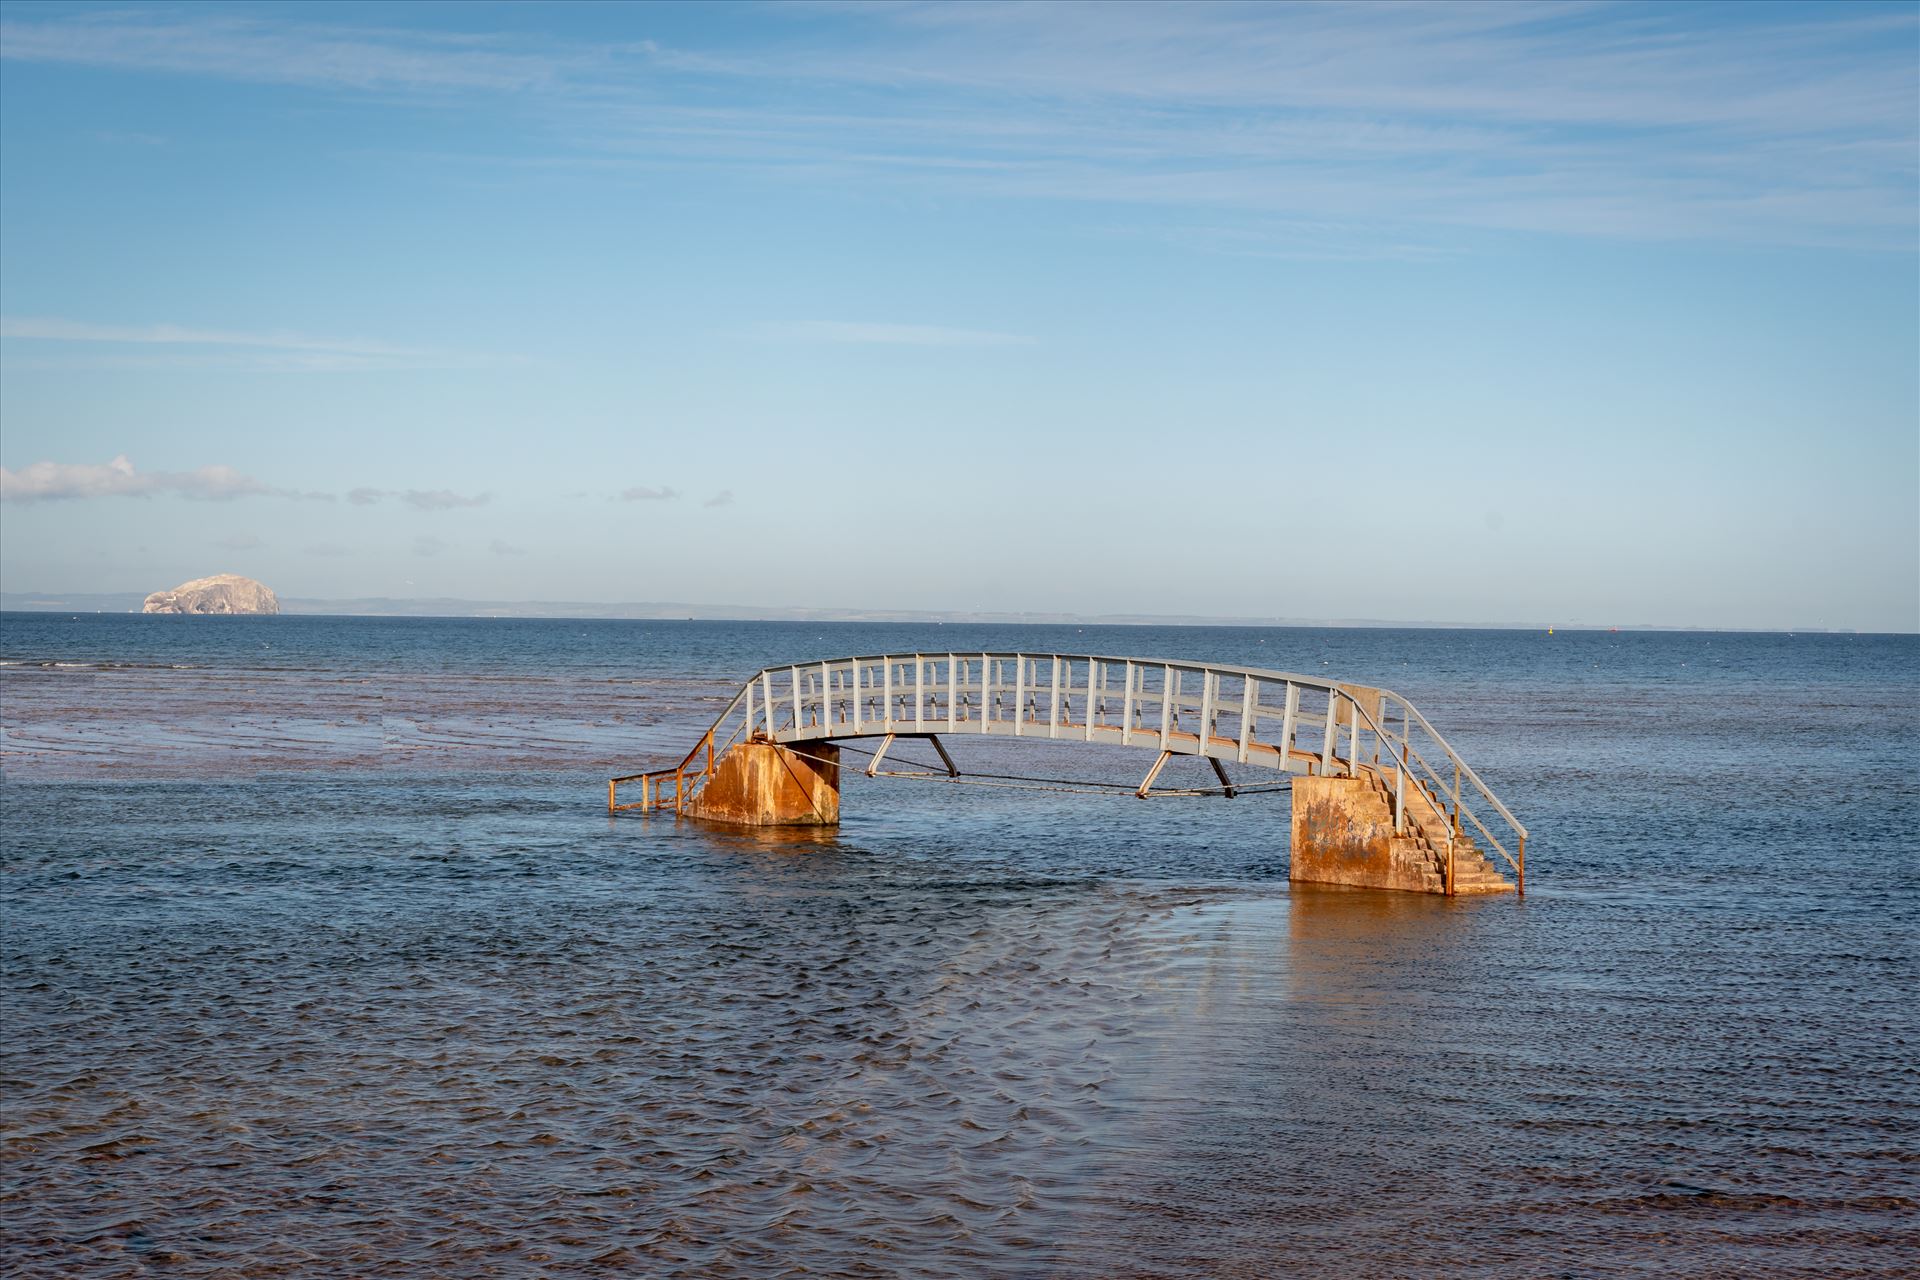 'Bridge to Nowhere’, Dunbar, ScotlandWhen the tide comes surging into shore, what should be an easy path to the beach becomes suddenly impassable. At high tide, the water swallows the land around the bridge, making it look as though it’s stranded in the middle of a sea.